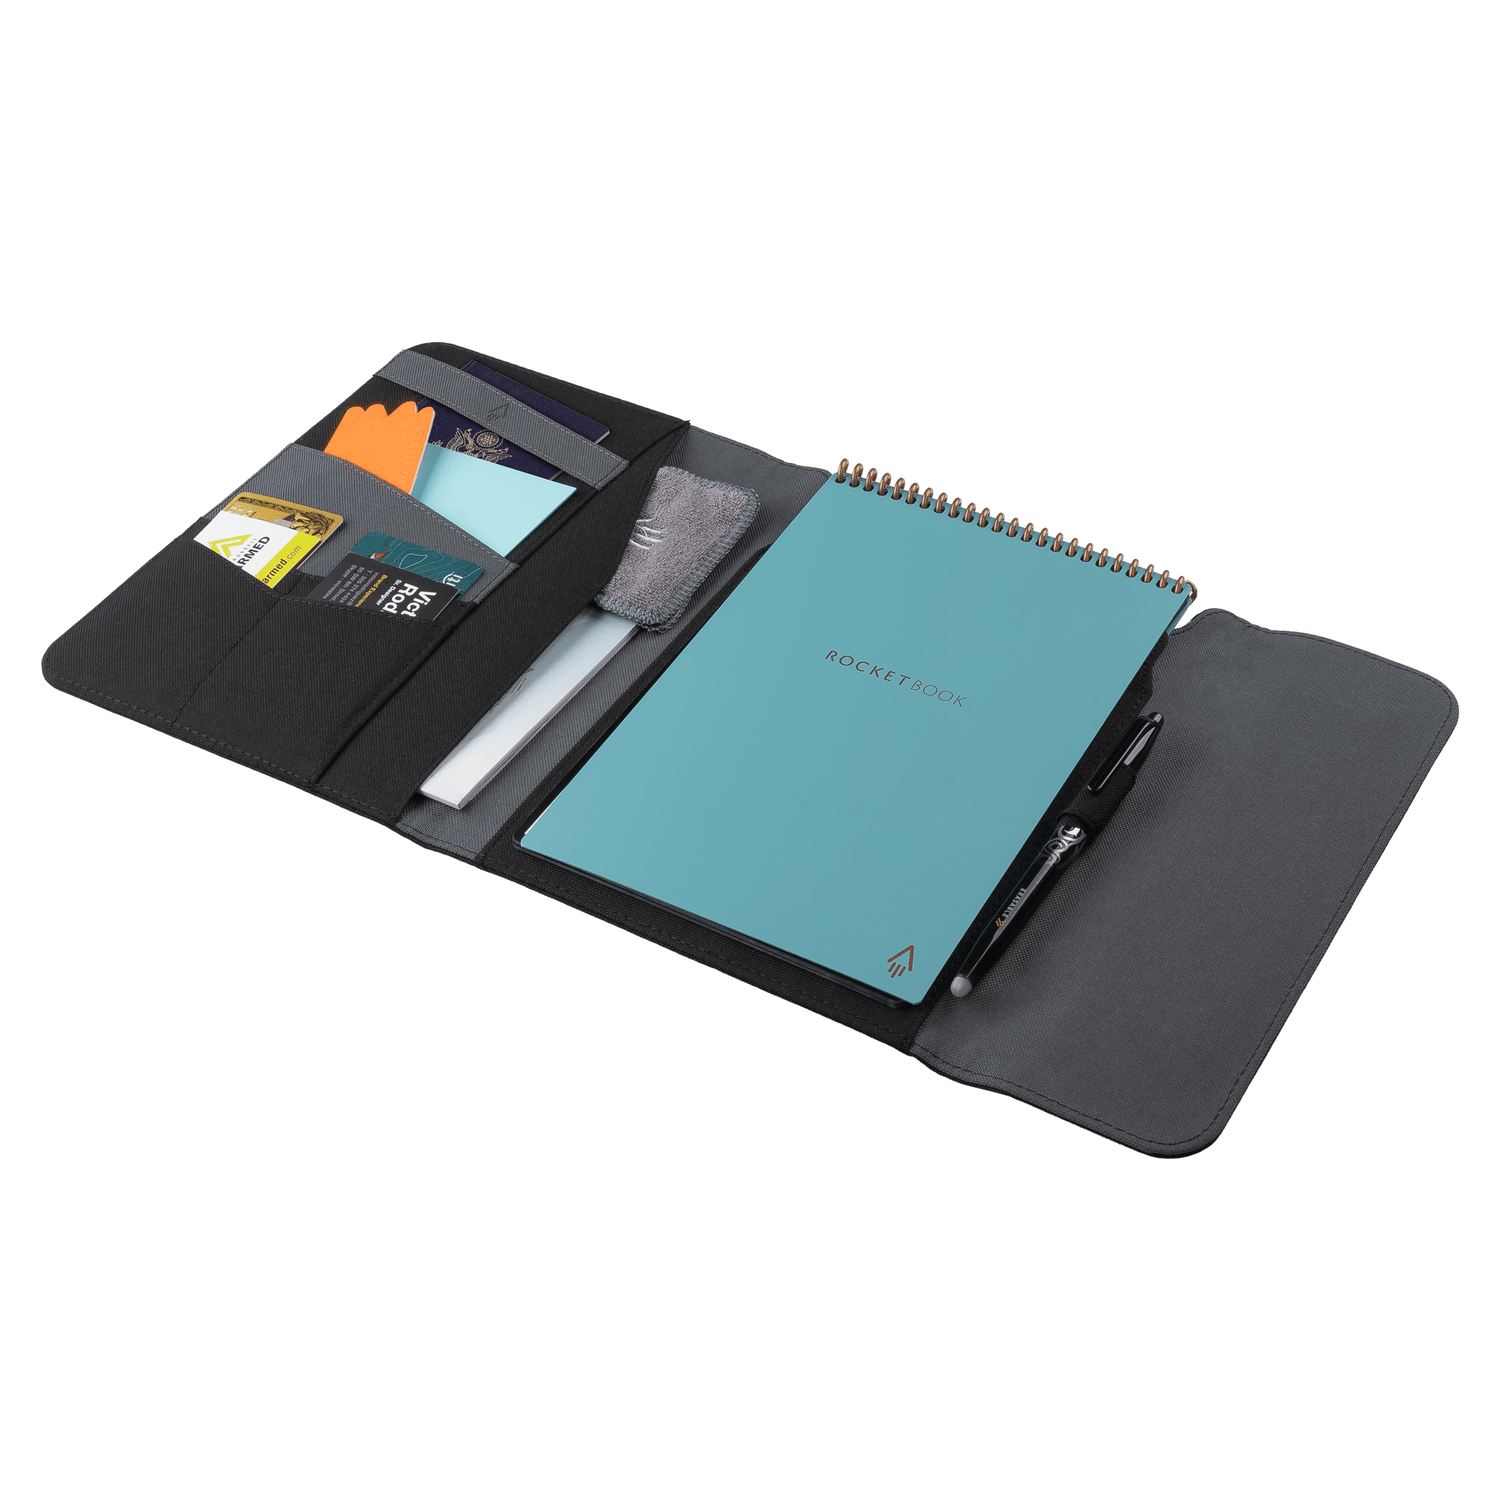 Rocketbook Capsule 2.0 vs. Rocketbook Folio Cover - Which Cover Is